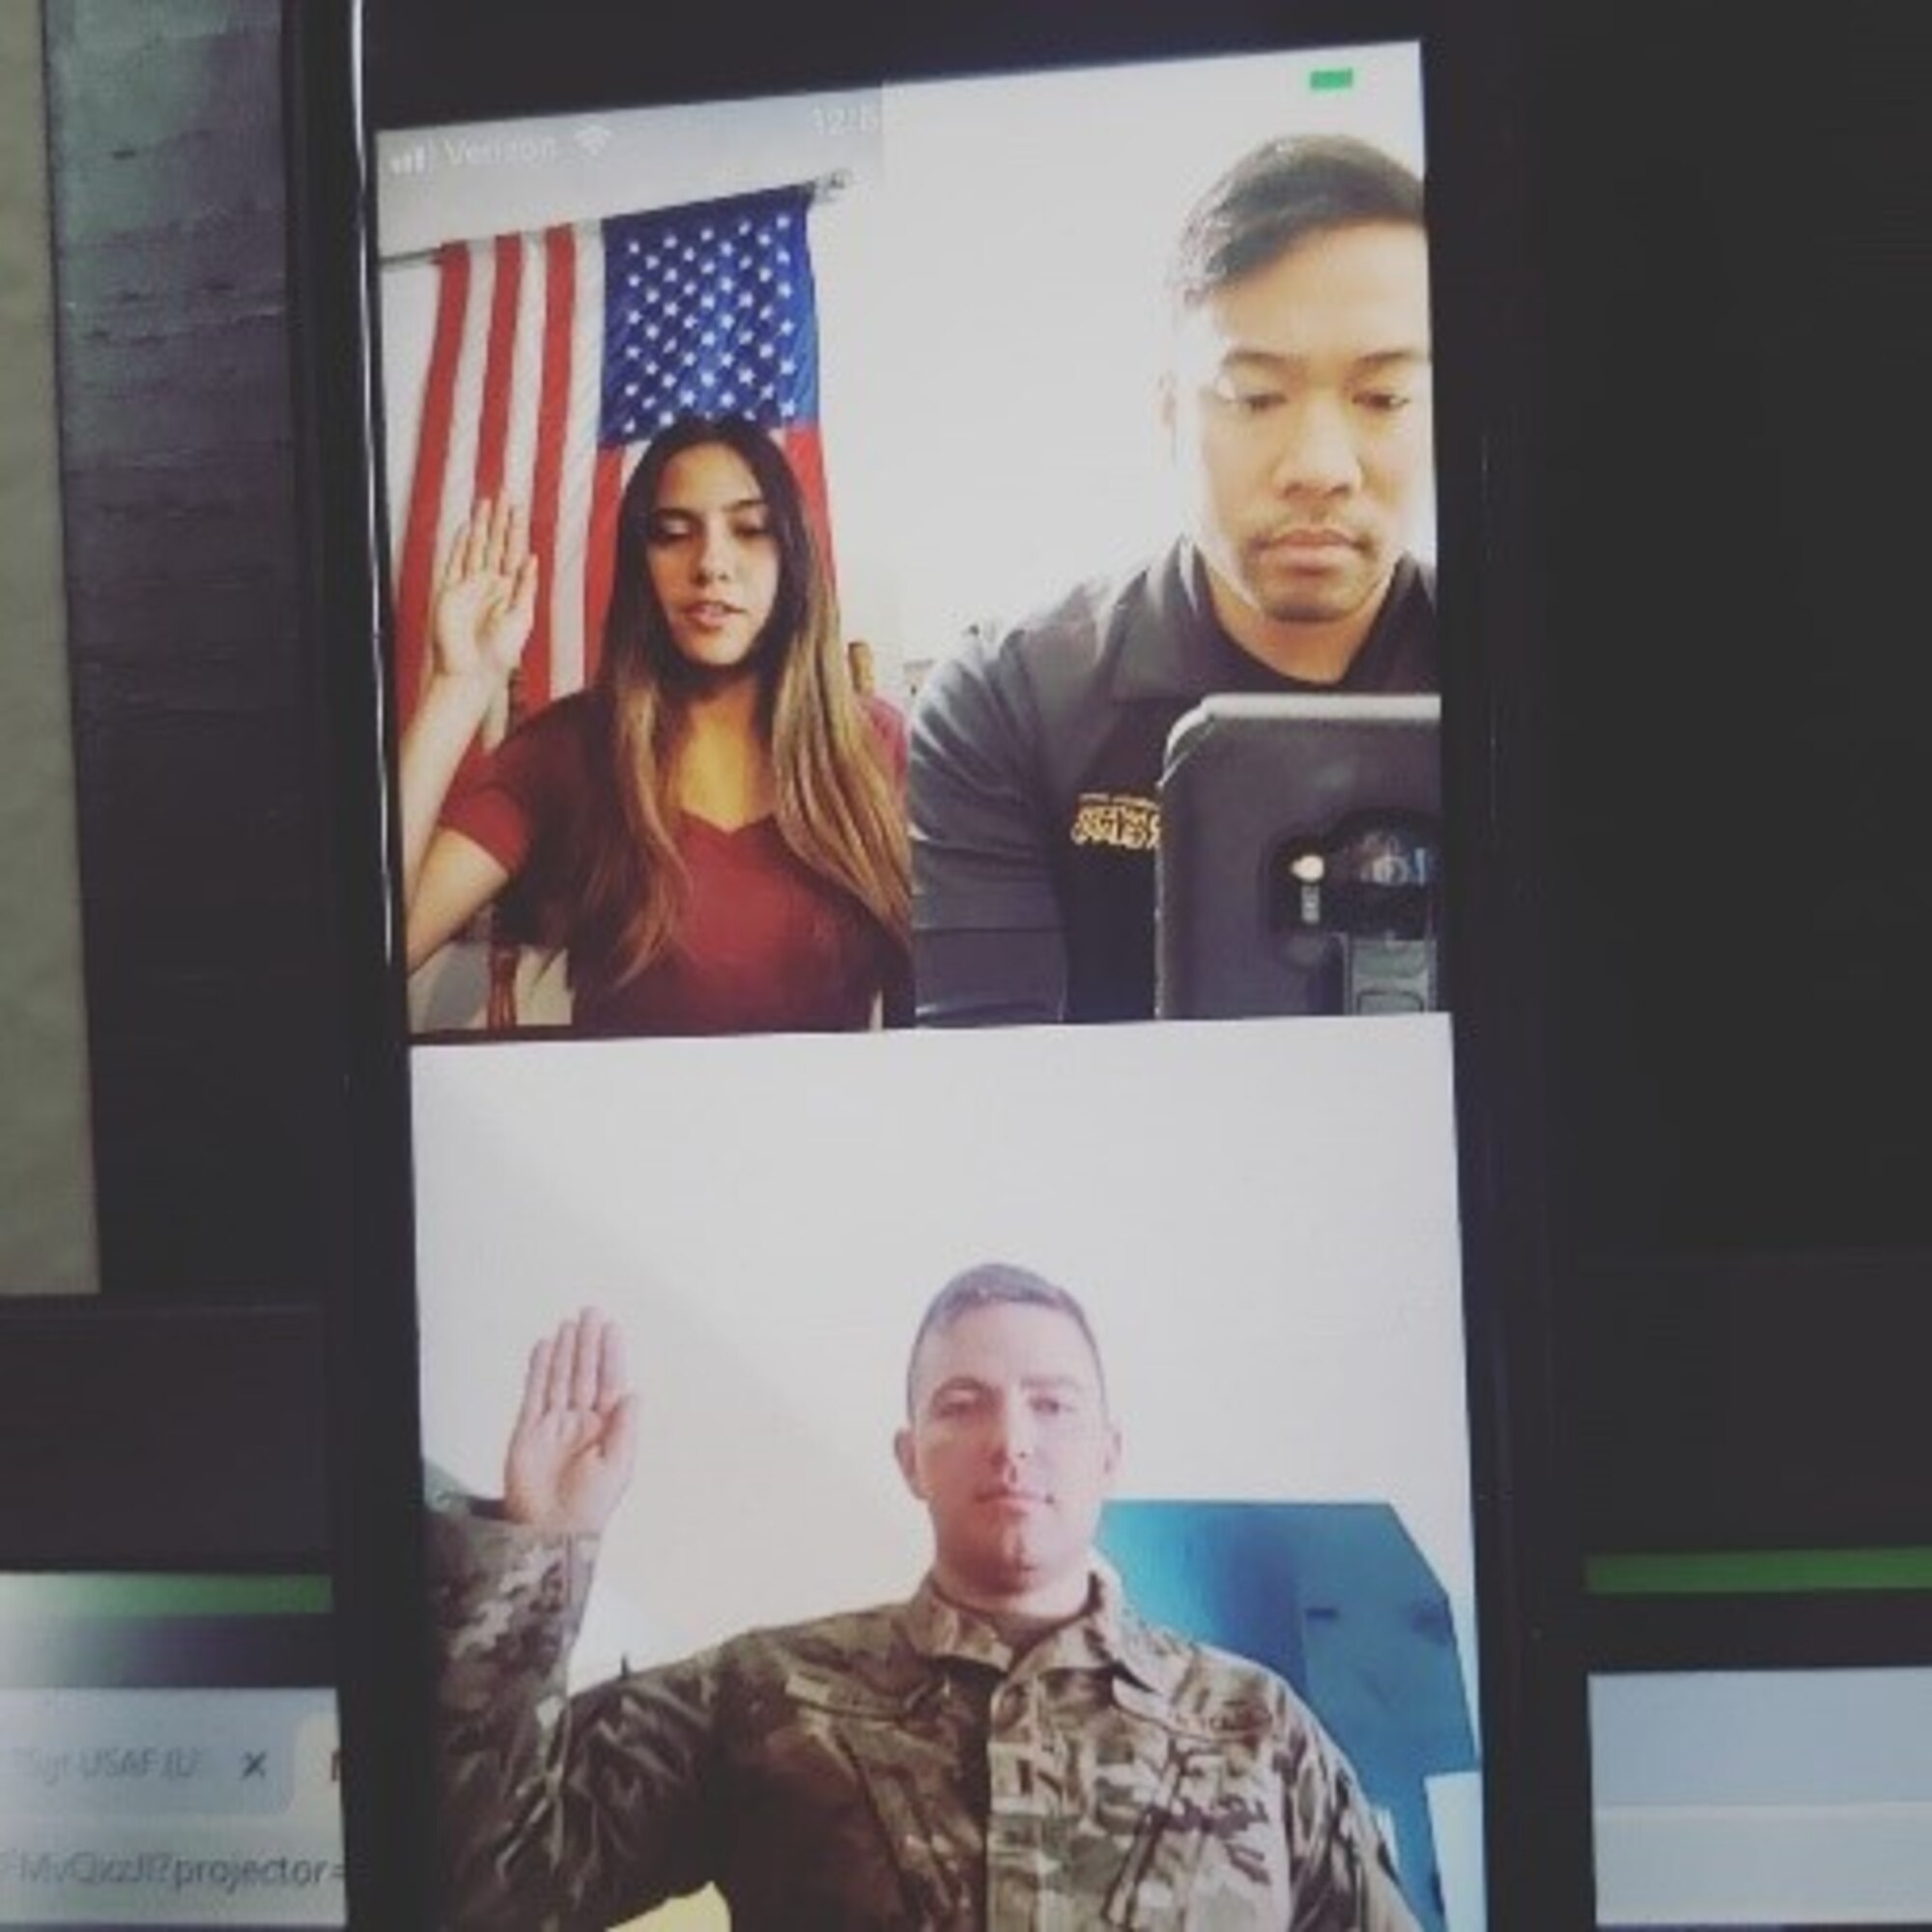 Phone screen showing a man administering the Oath of Enlistment to a lady virtually